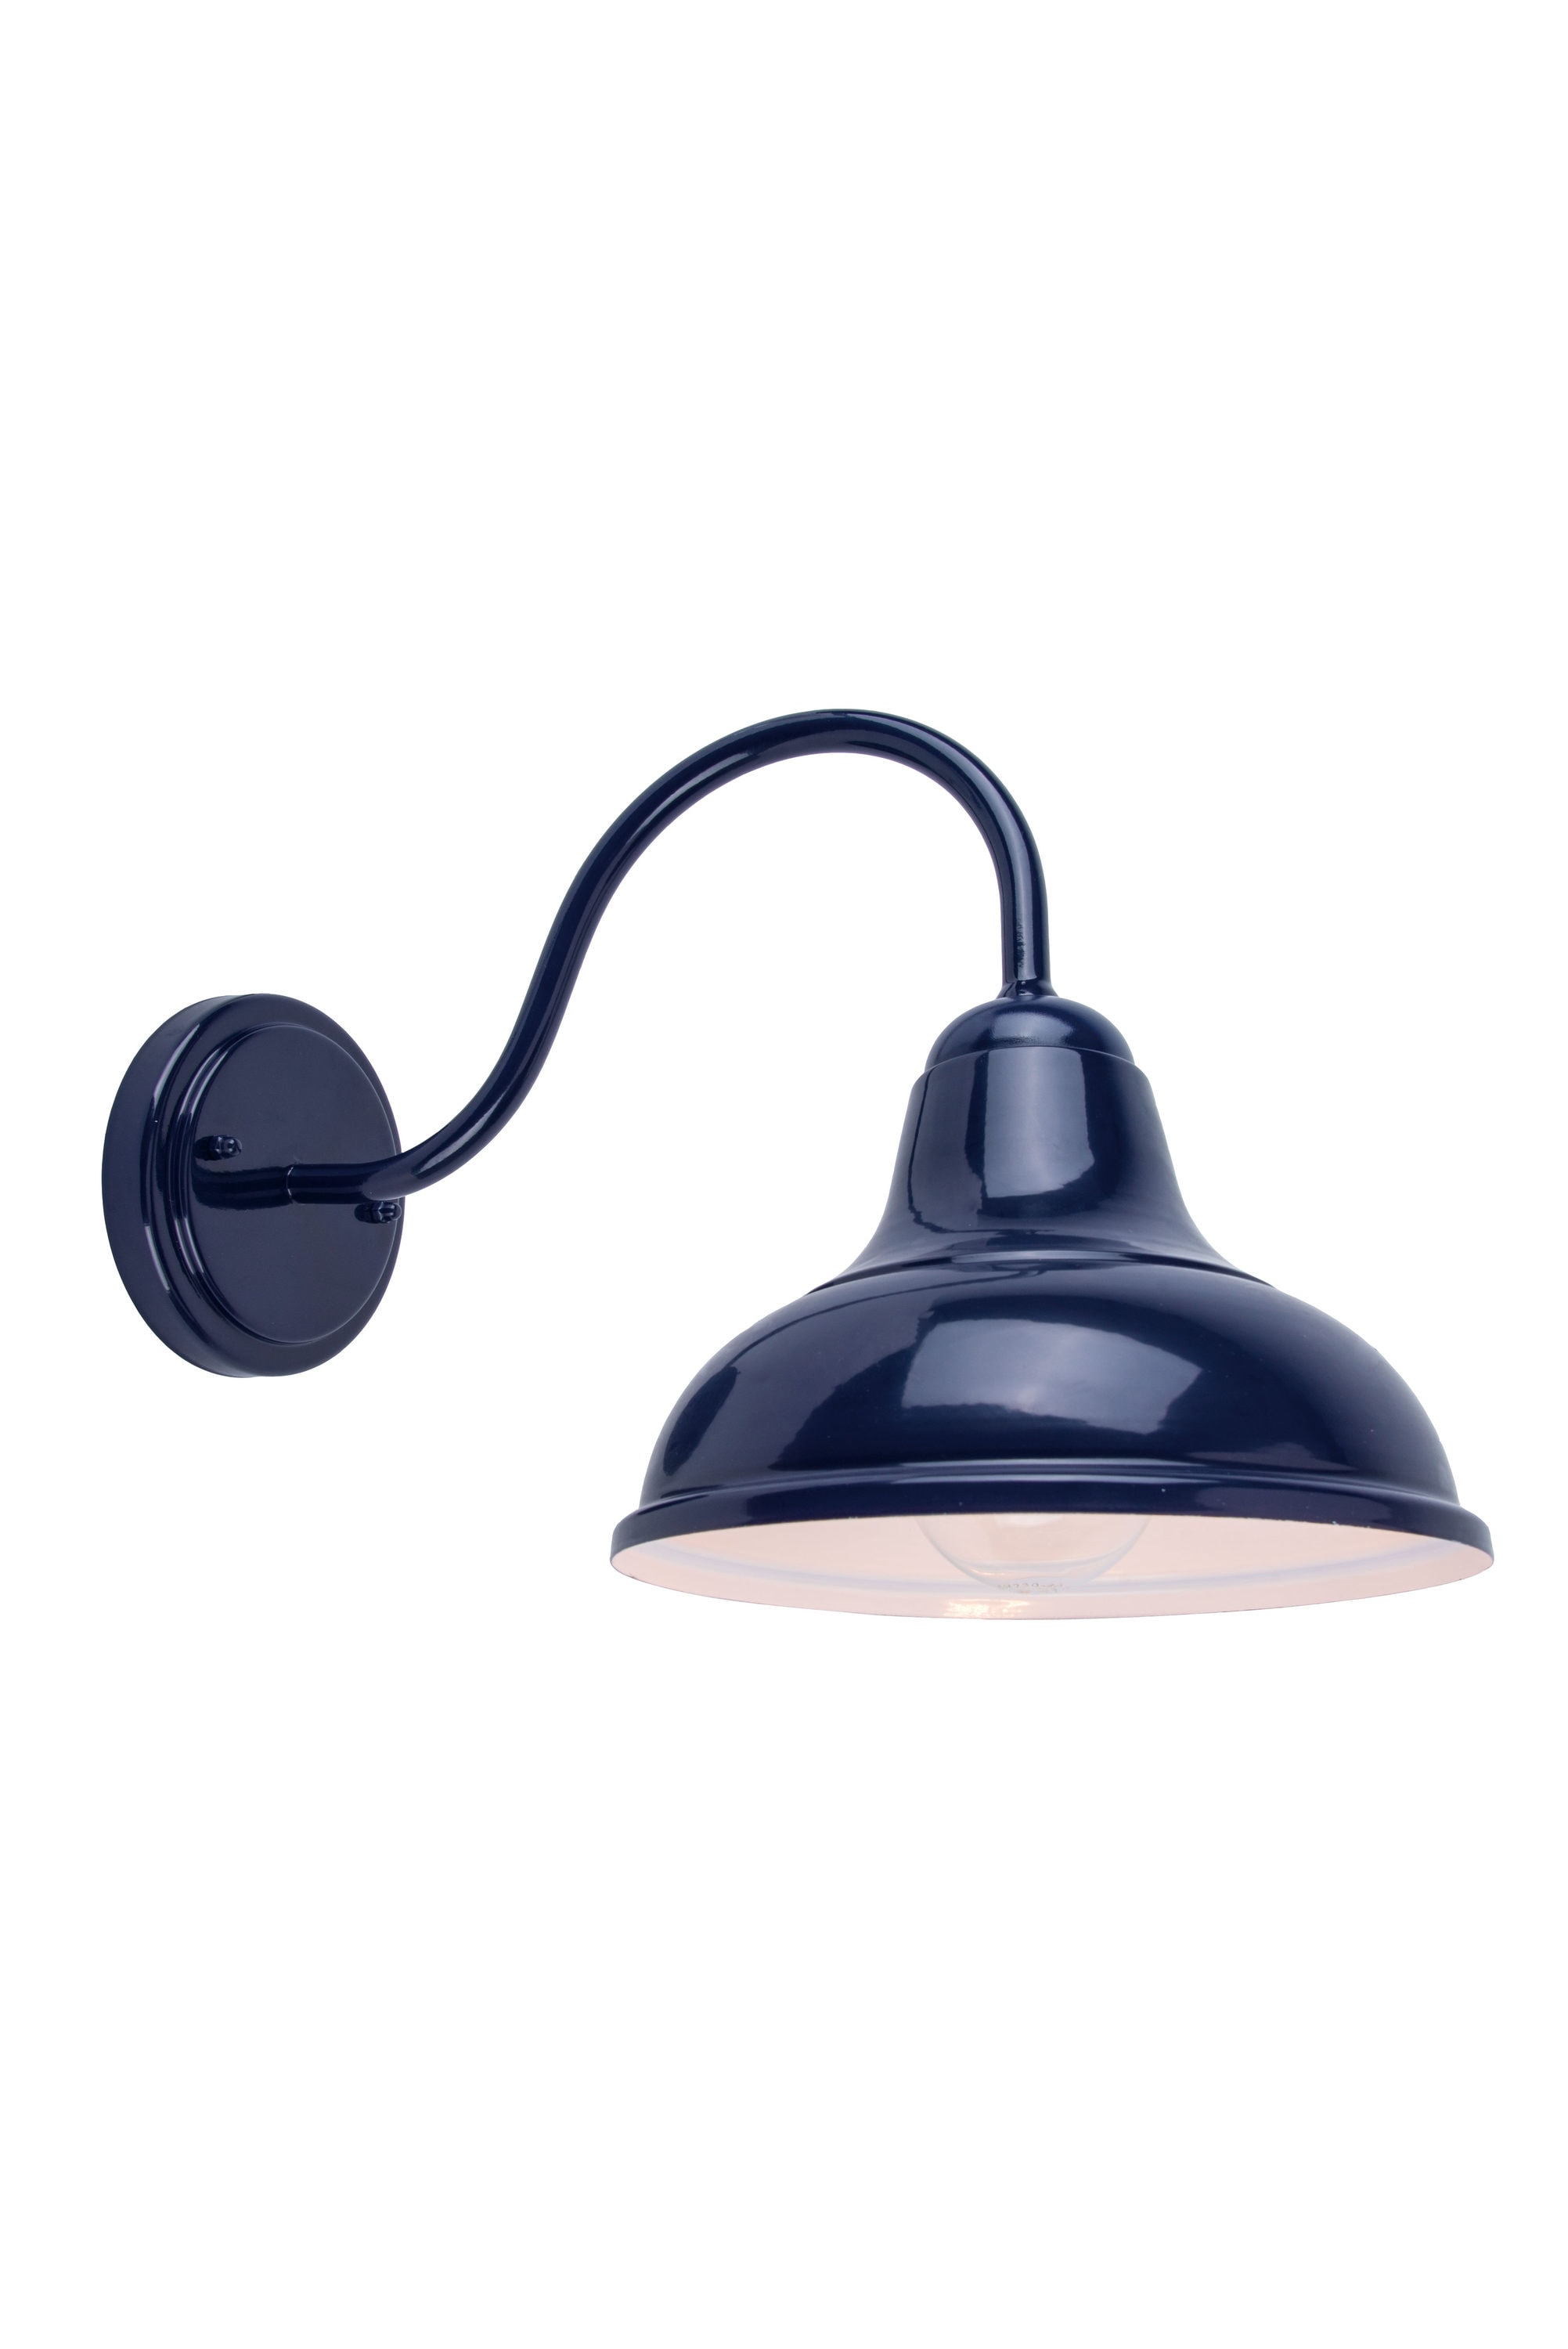 Navy Blue Outdoor Wall Light At Lowes